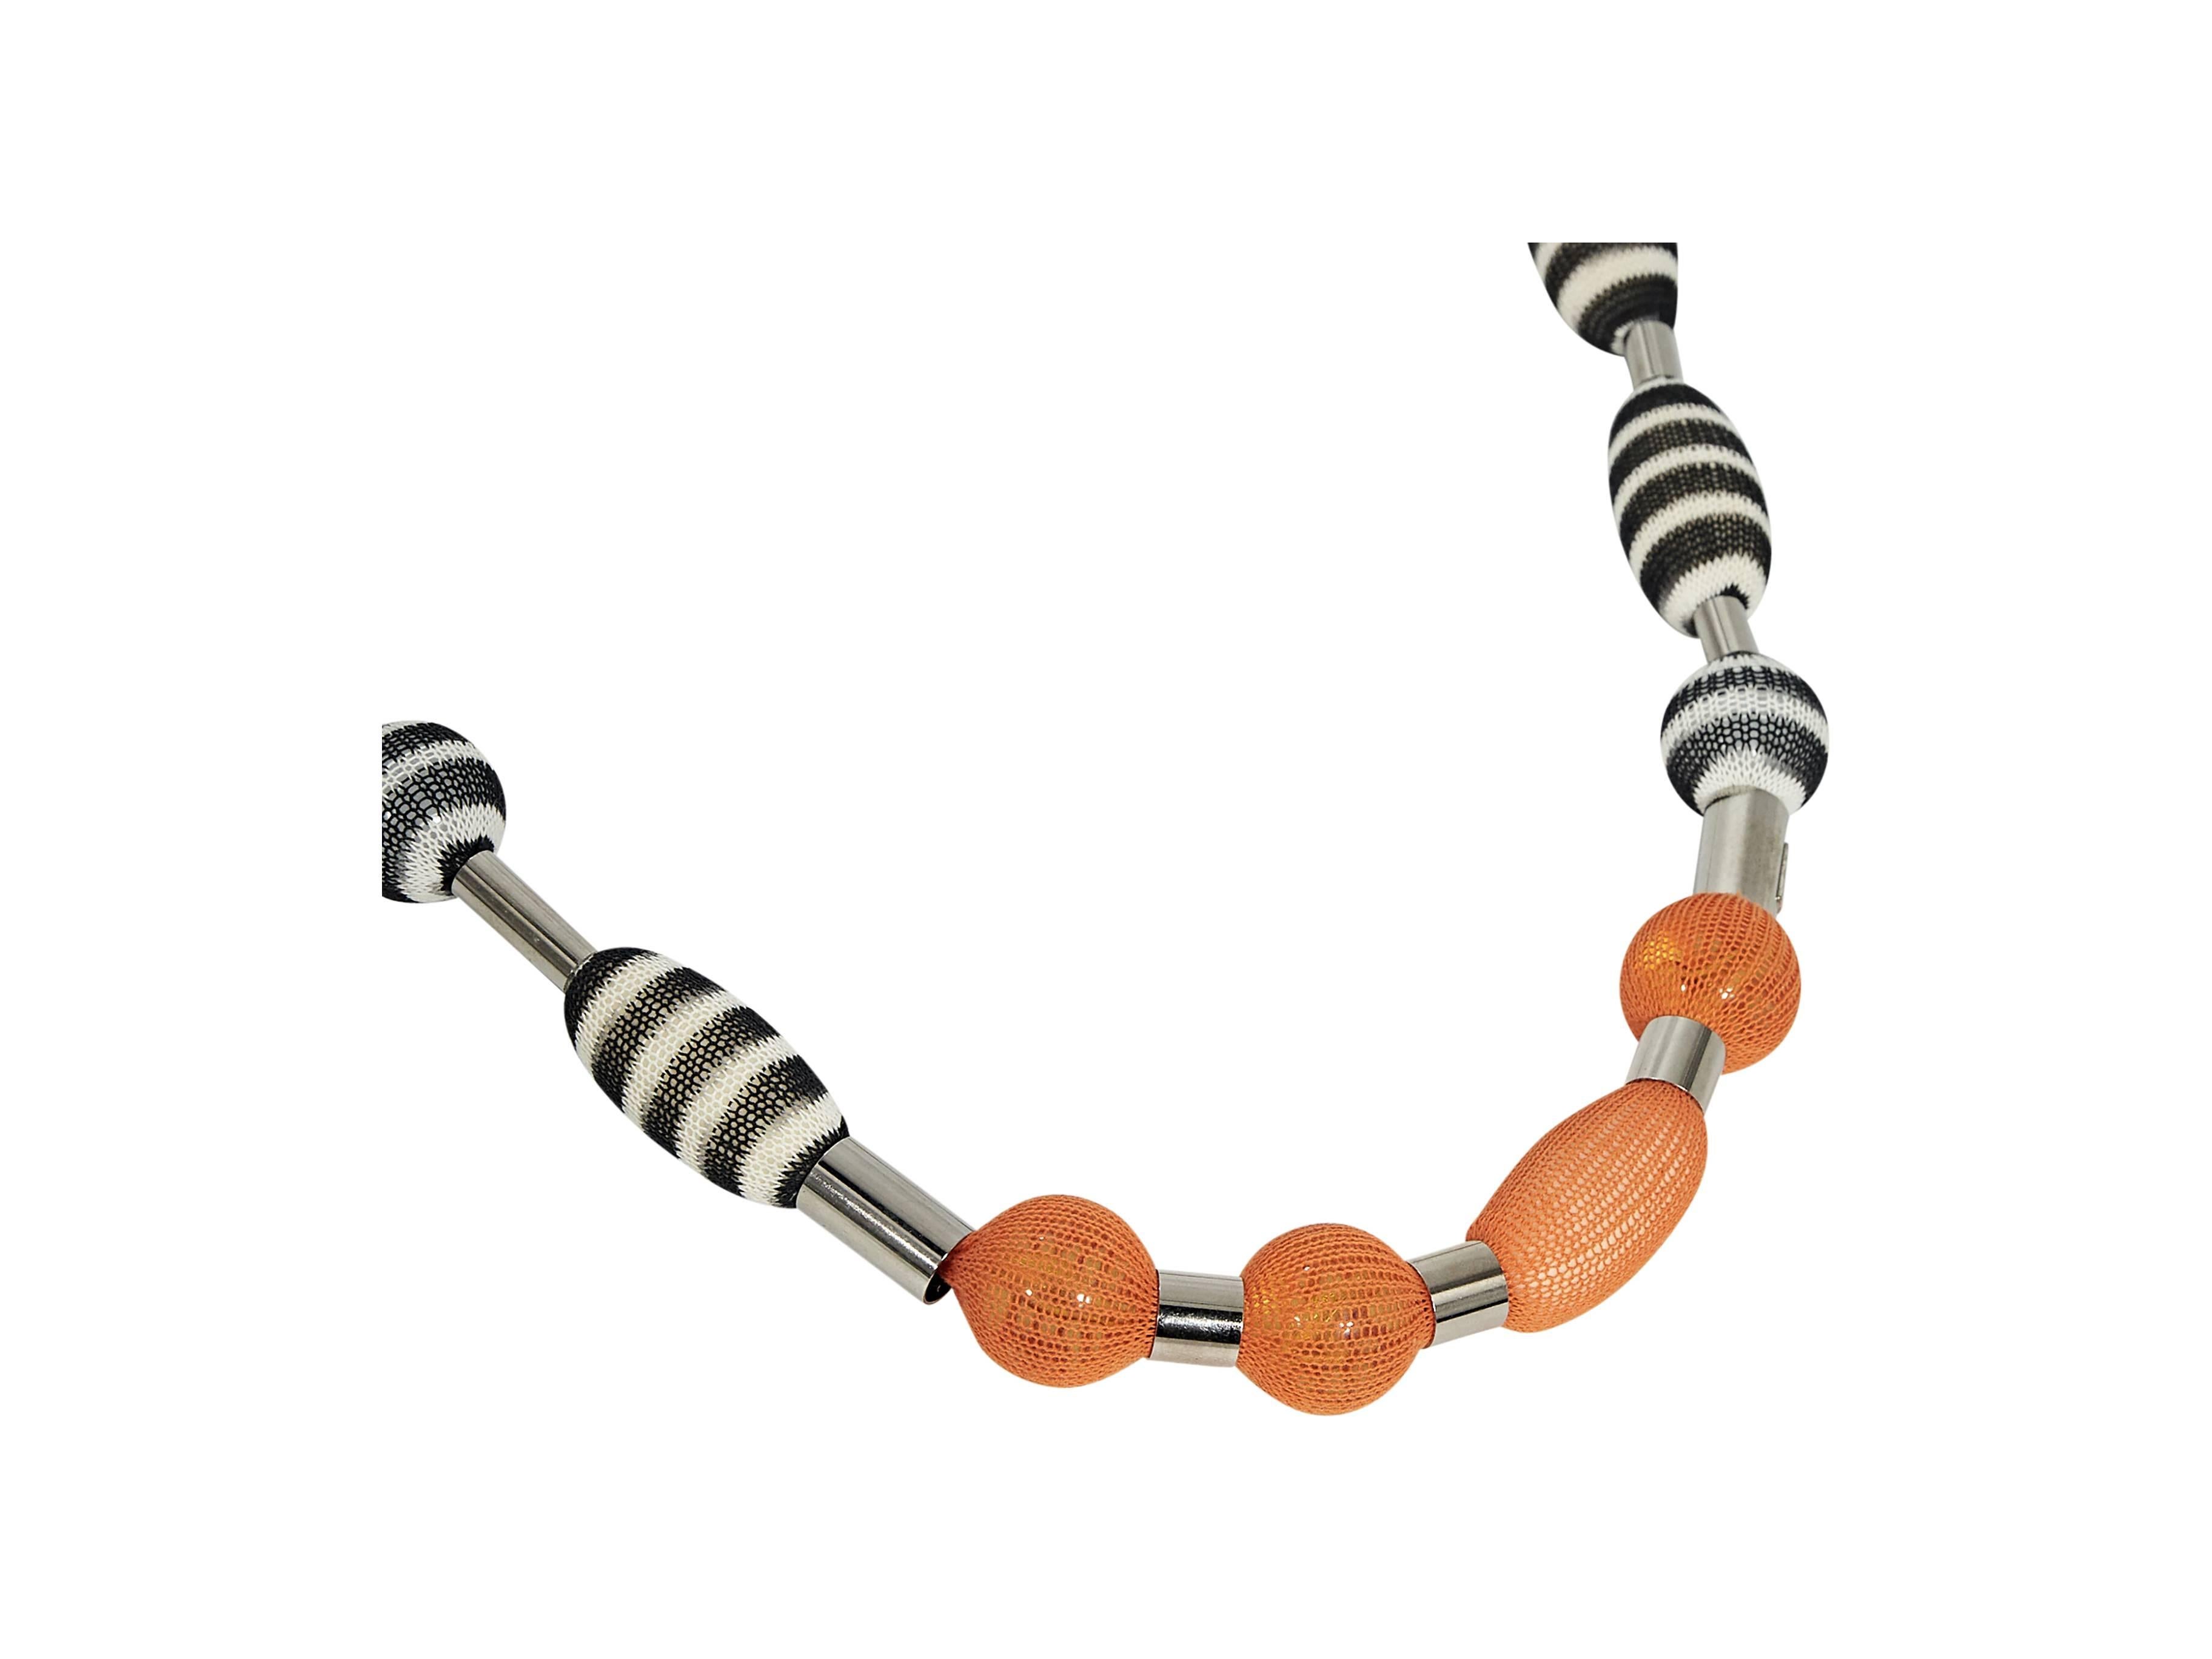 Product details:  Black and orange beaded necklace by Missoni.  Single stand design.  Adjustable lobster clasp closure.  Silvertone hardware. 
Condition: Pre-owned. Very good.

Est. Retail $ 378.00